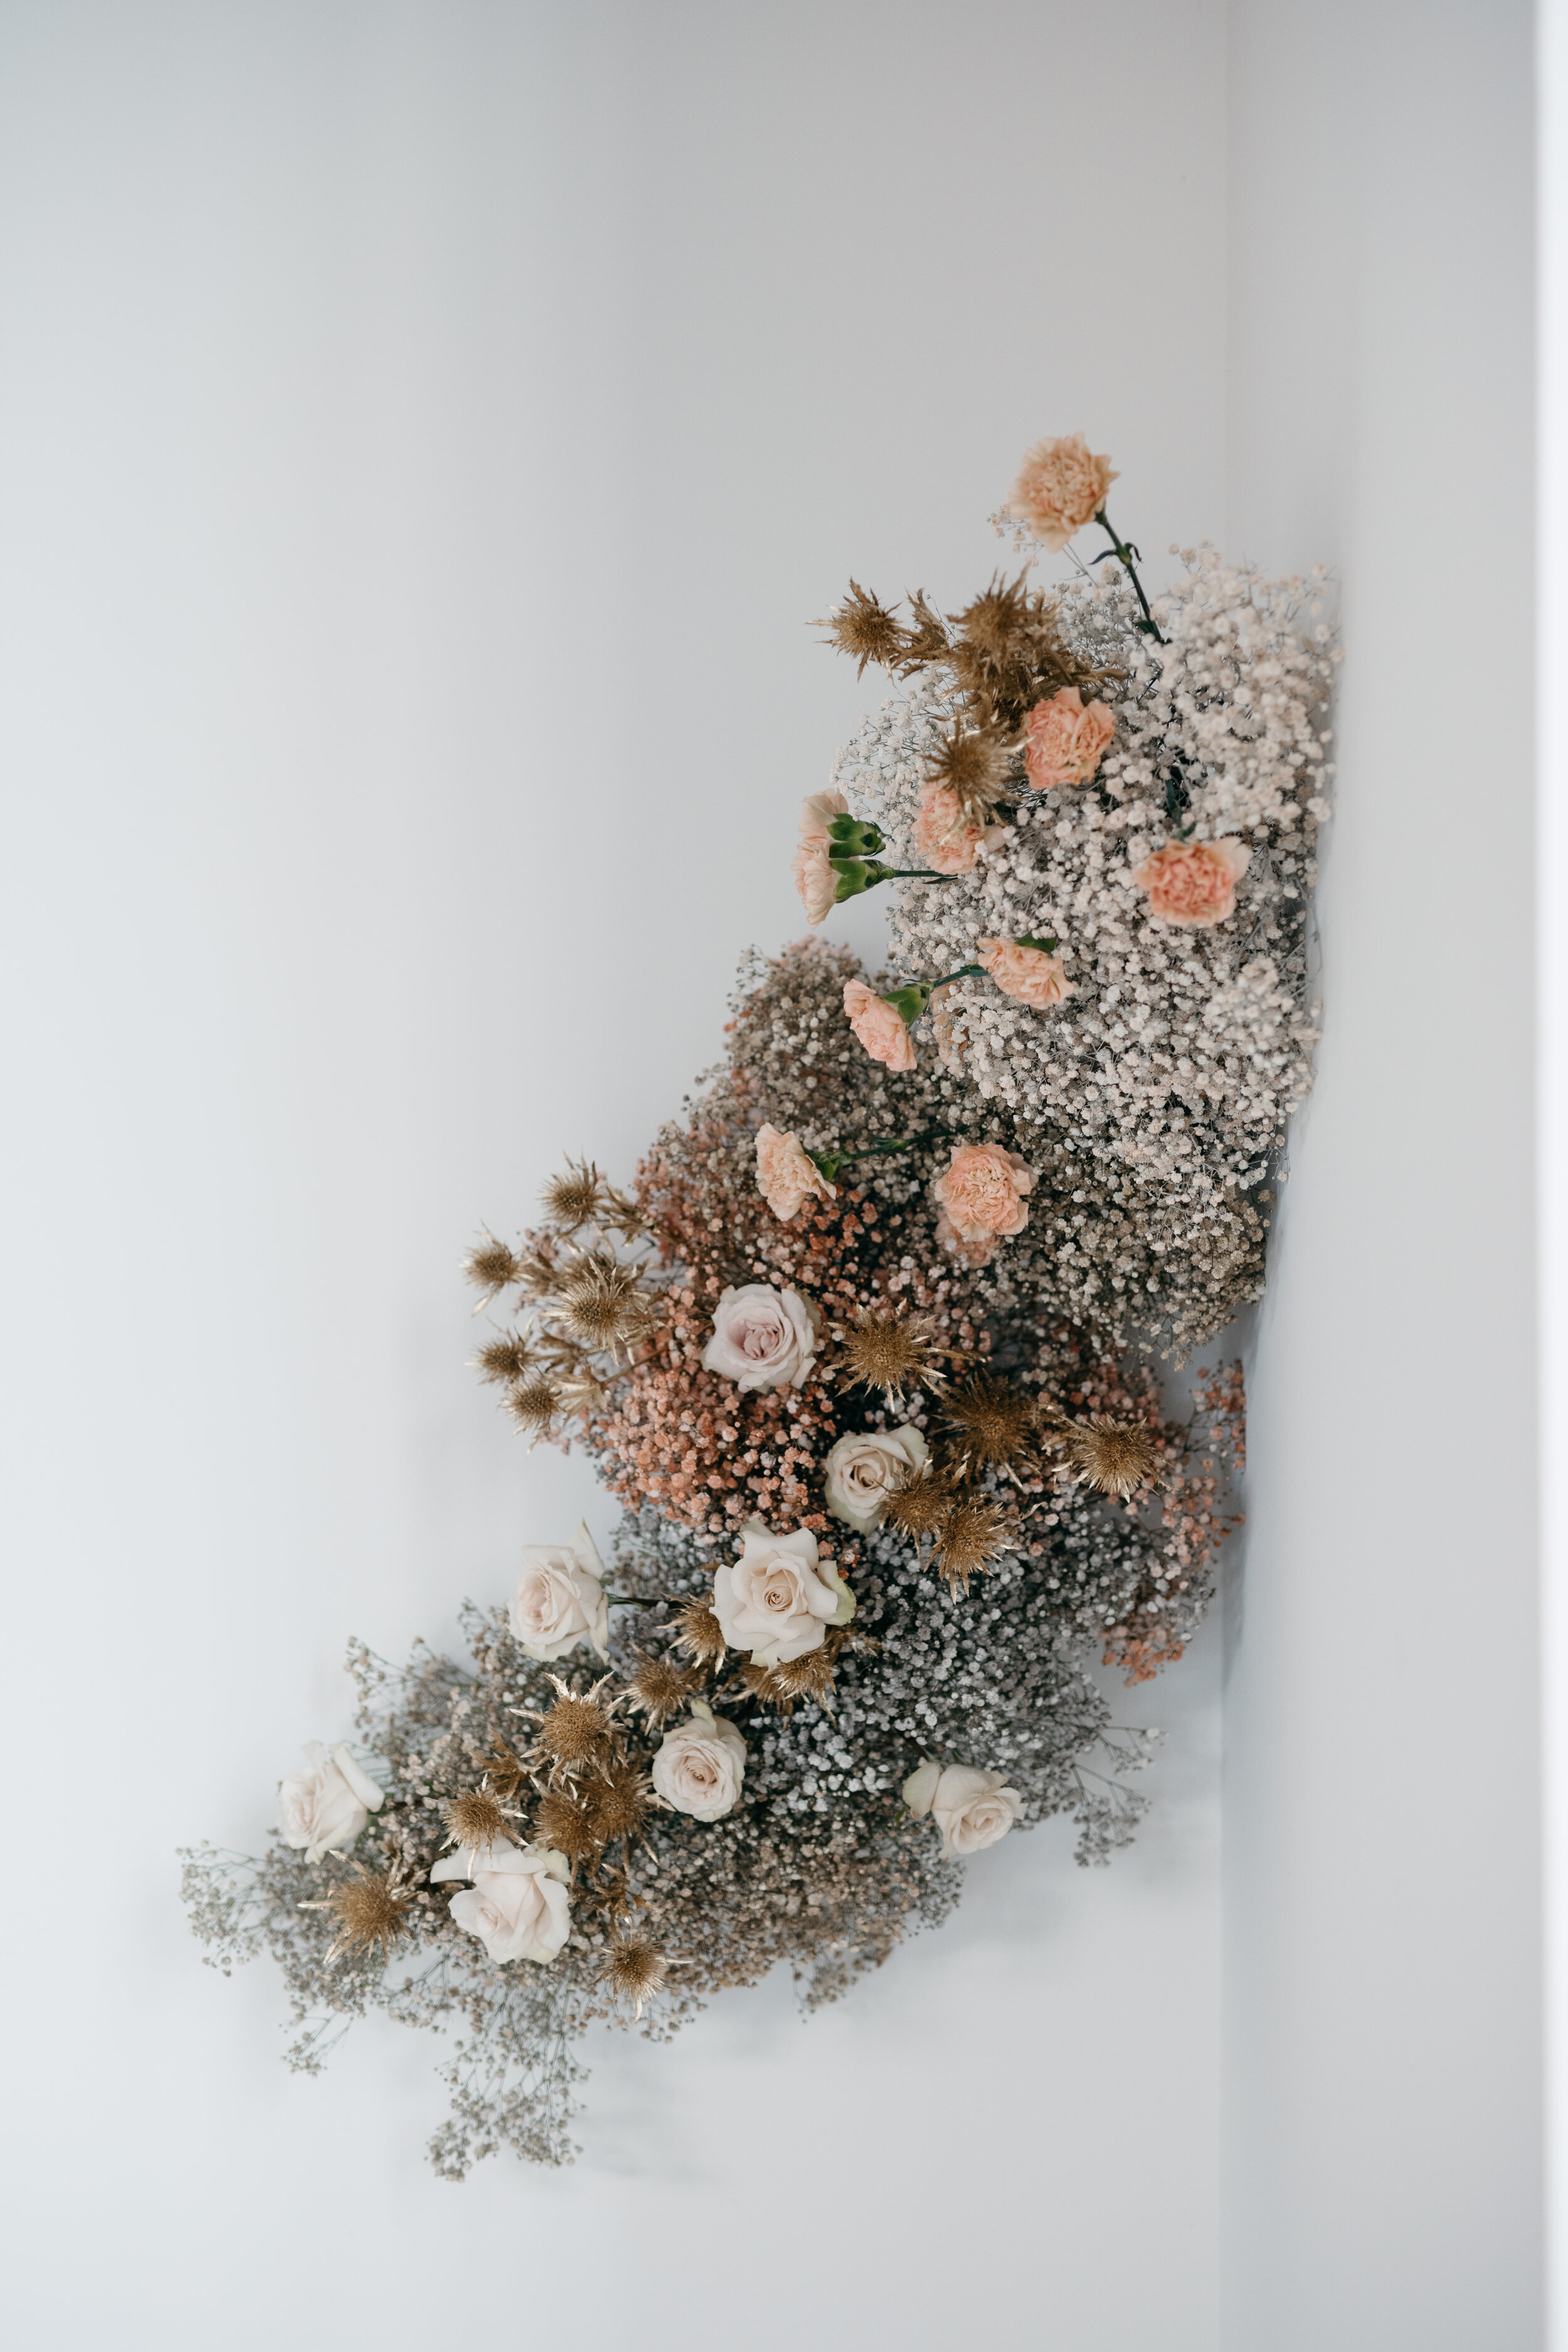 Growing wall installation of fresh and dried florals featuring dyed baby's breath, earth tone carnations, and blush roses. Nashville wedding florist Rosemary & Finch at OZARI.